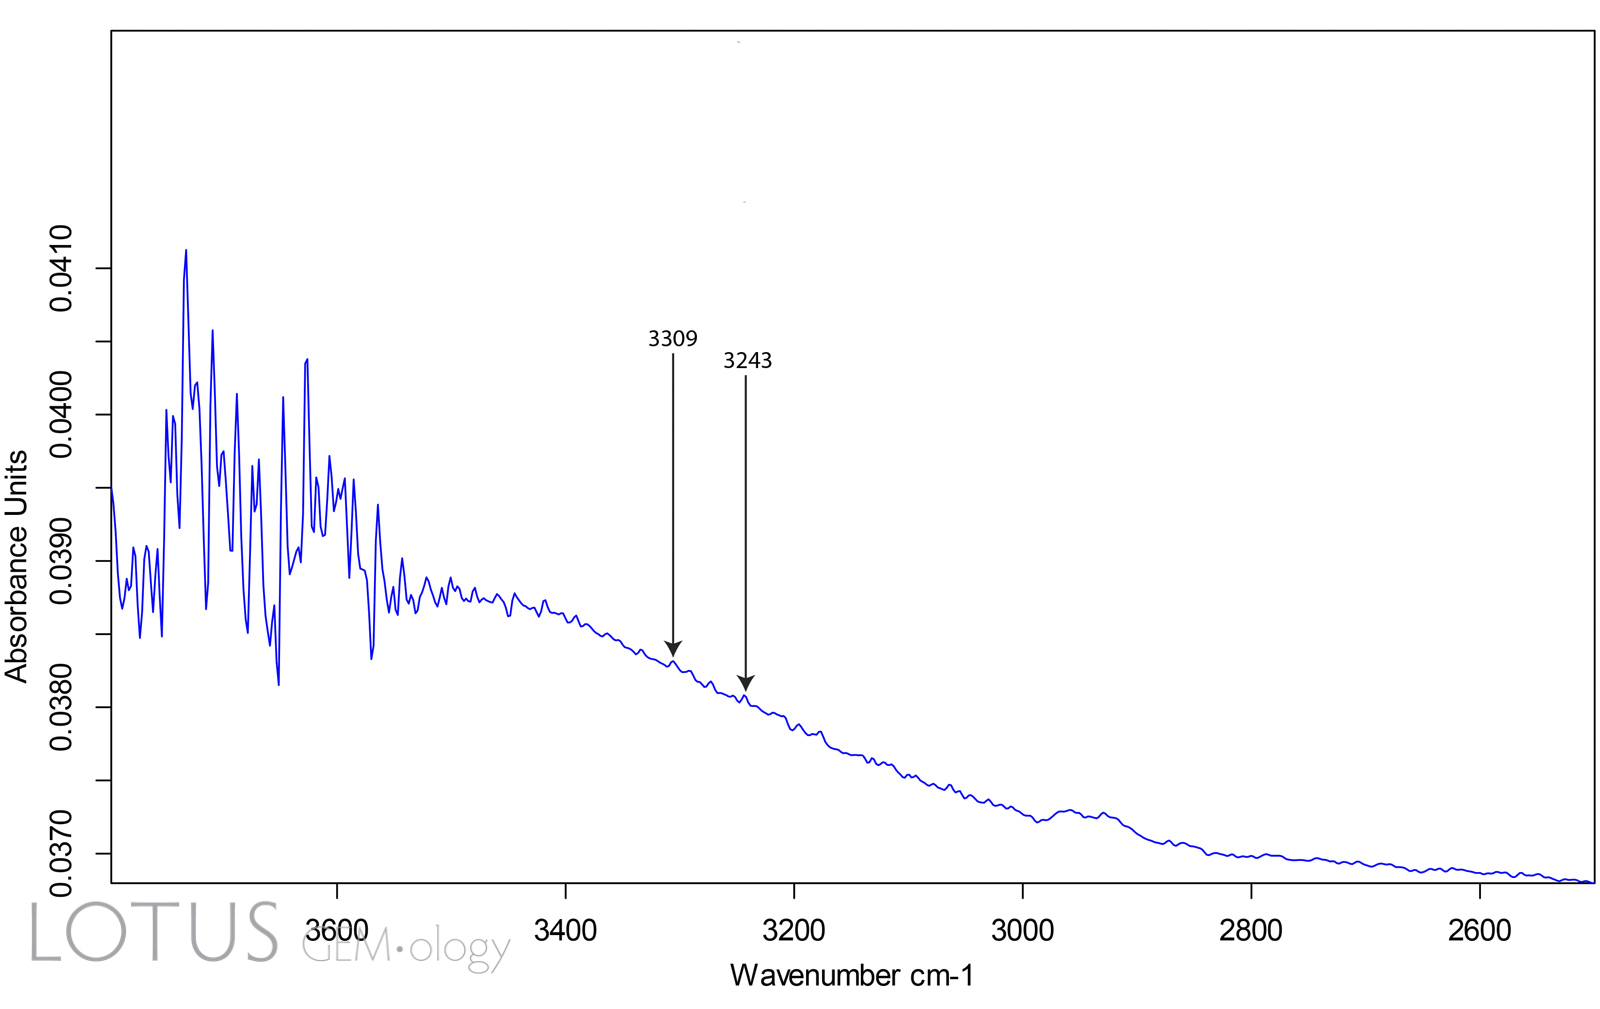 Figure 2. Infrared spectrum of a Madagascar pink sapphire using the Pike 4x beam condenser collection attachment. This sends a narrow beam through the gem. Using this technique, the 3309 cm-1 was at the noise floor, while the 3232 cm-1 peak was not visible at all.